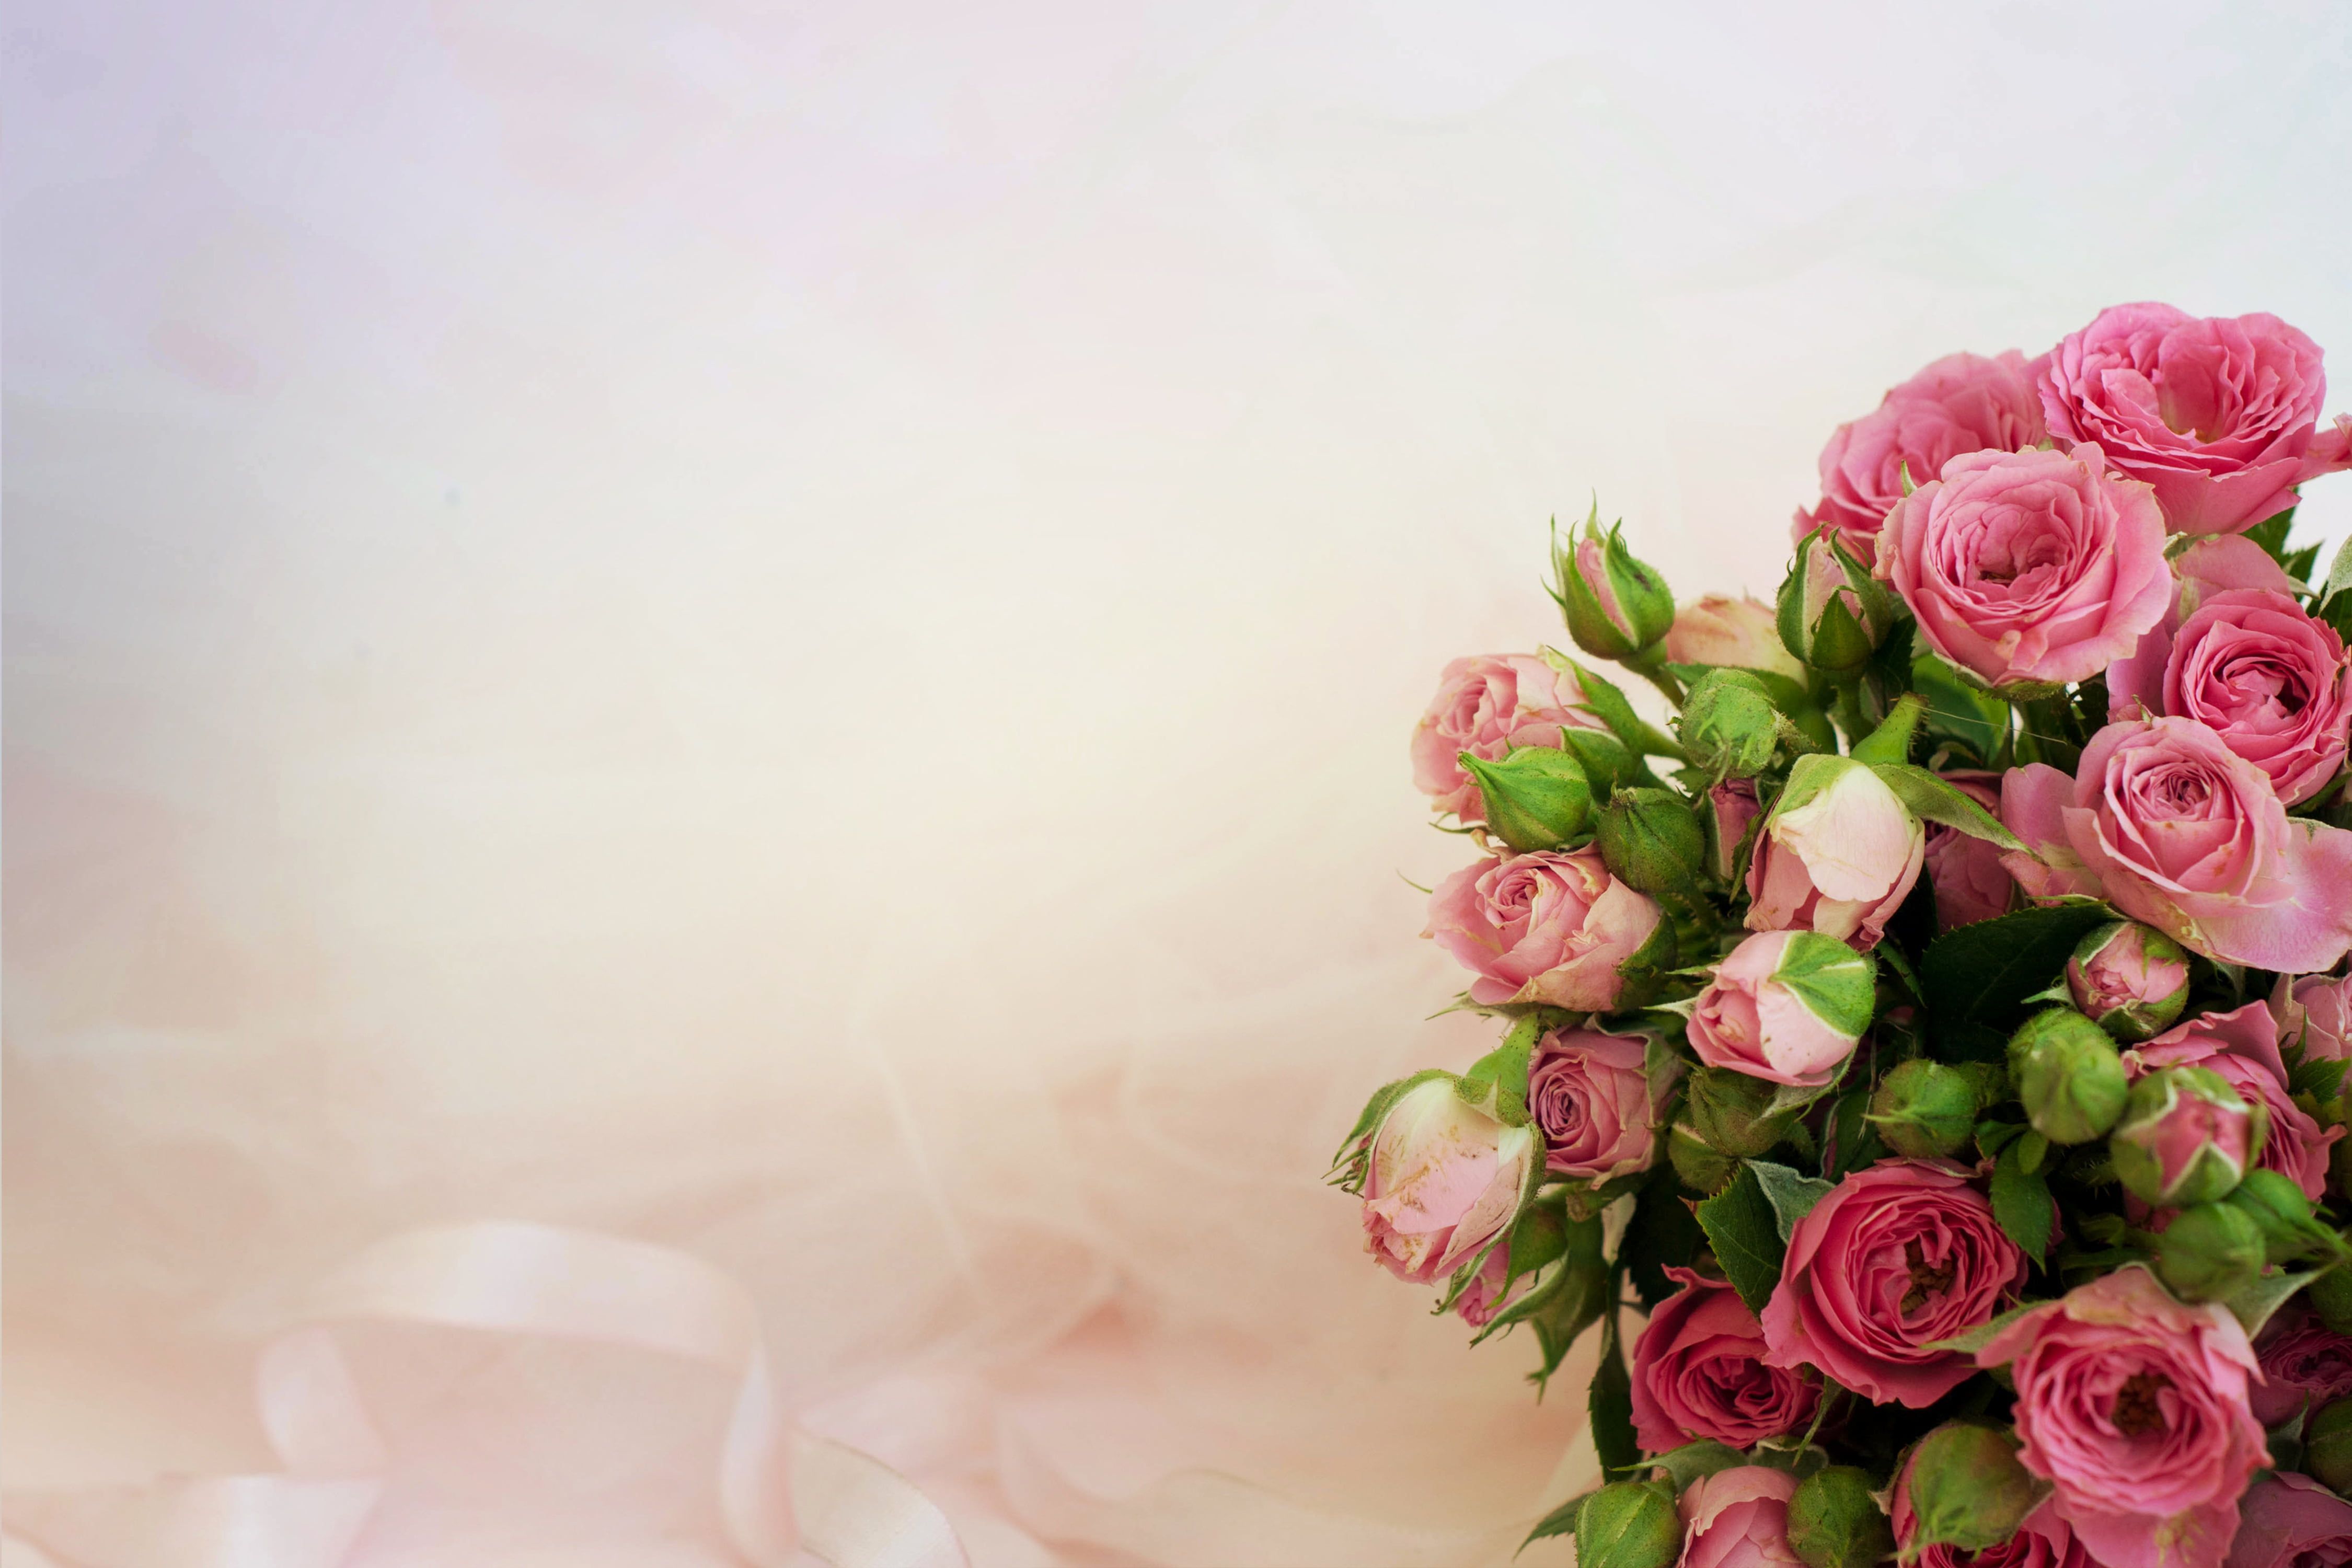 pink rose bouquet #background #roses #bouquet #pink K #wallpaper #hdwallpaper #desktop. Pink rose bouquet, Pink flower bouquet, Yellow rose bouquet